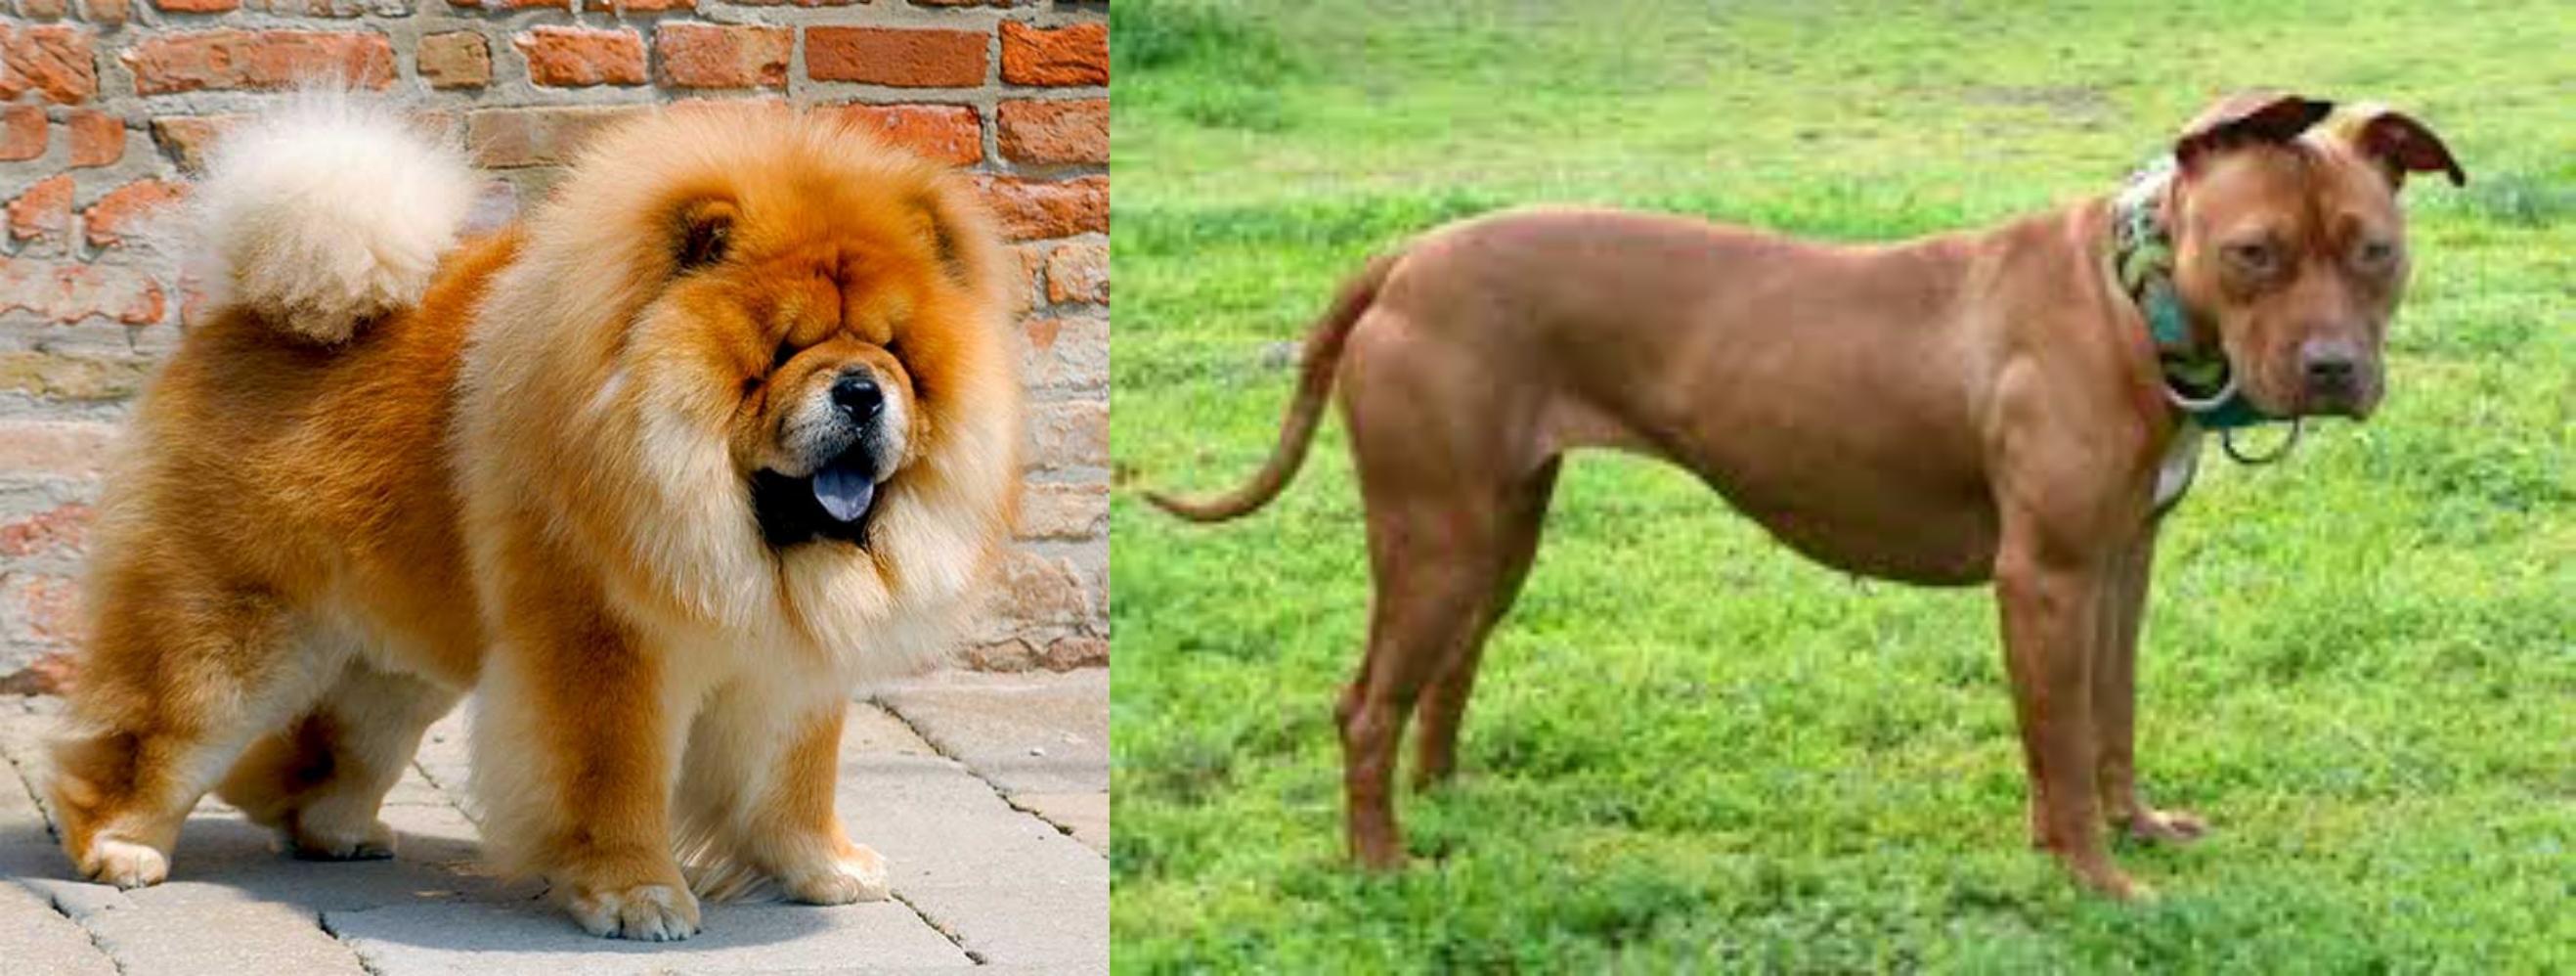 Chow Chow vs American Pit Bull Terrier Breed Comparison